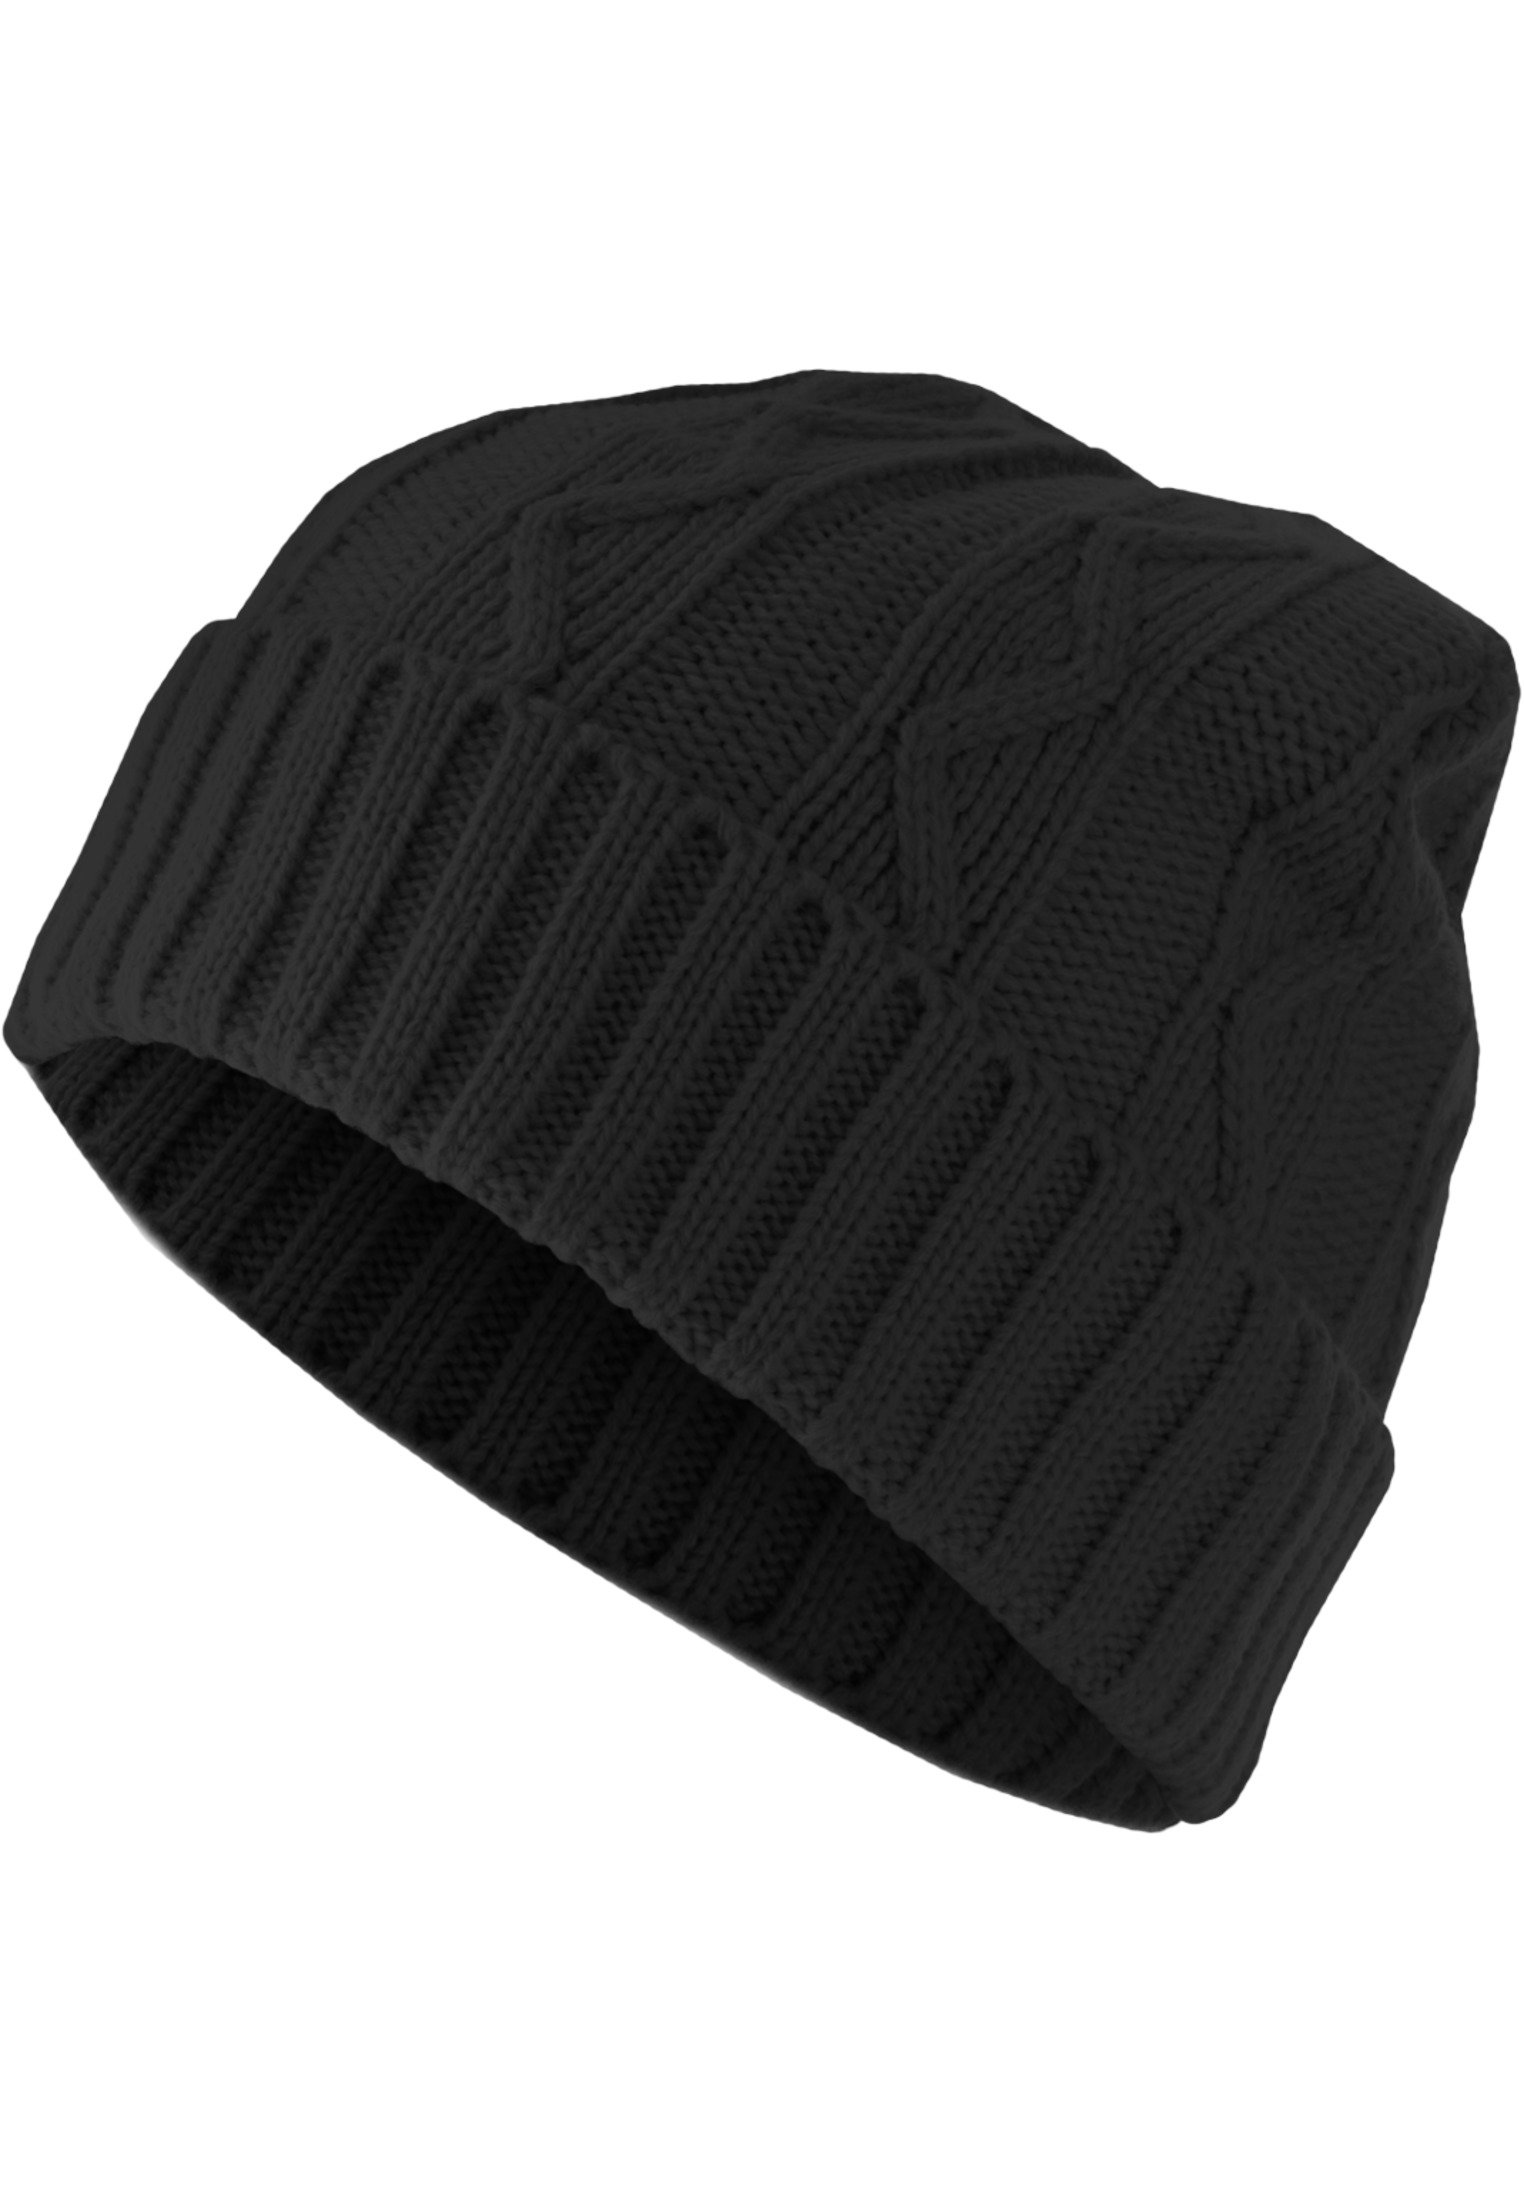 Beanie Cable Flap black one size